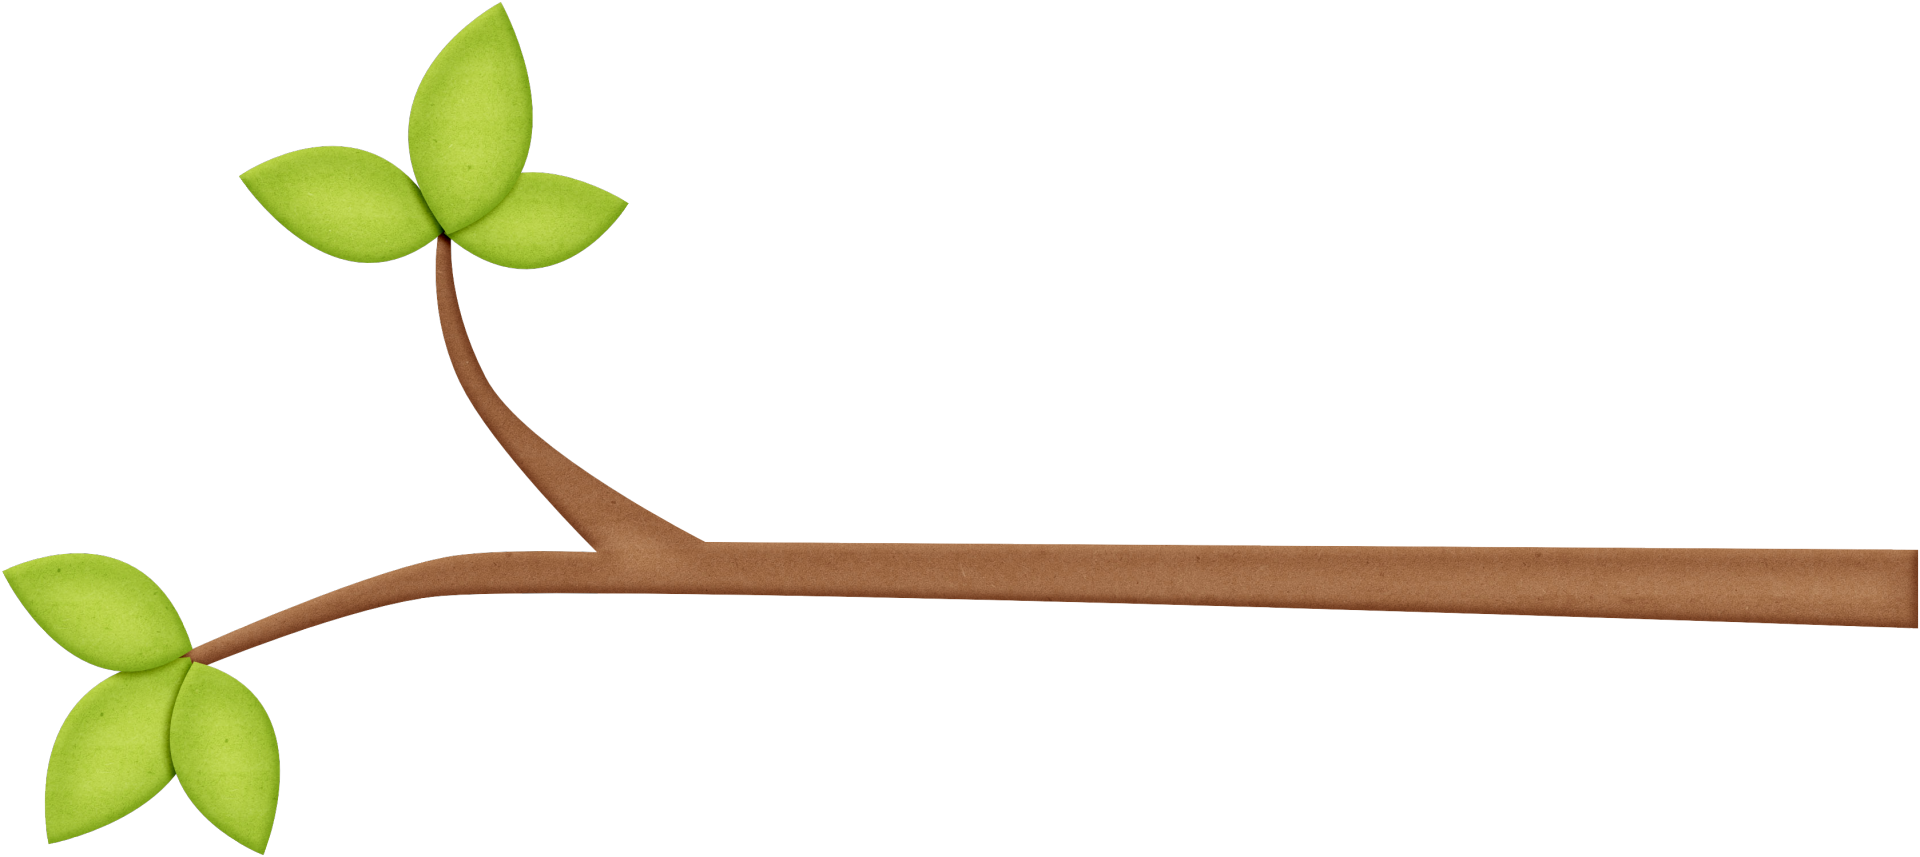 A Tree Branch With A Green Leaf